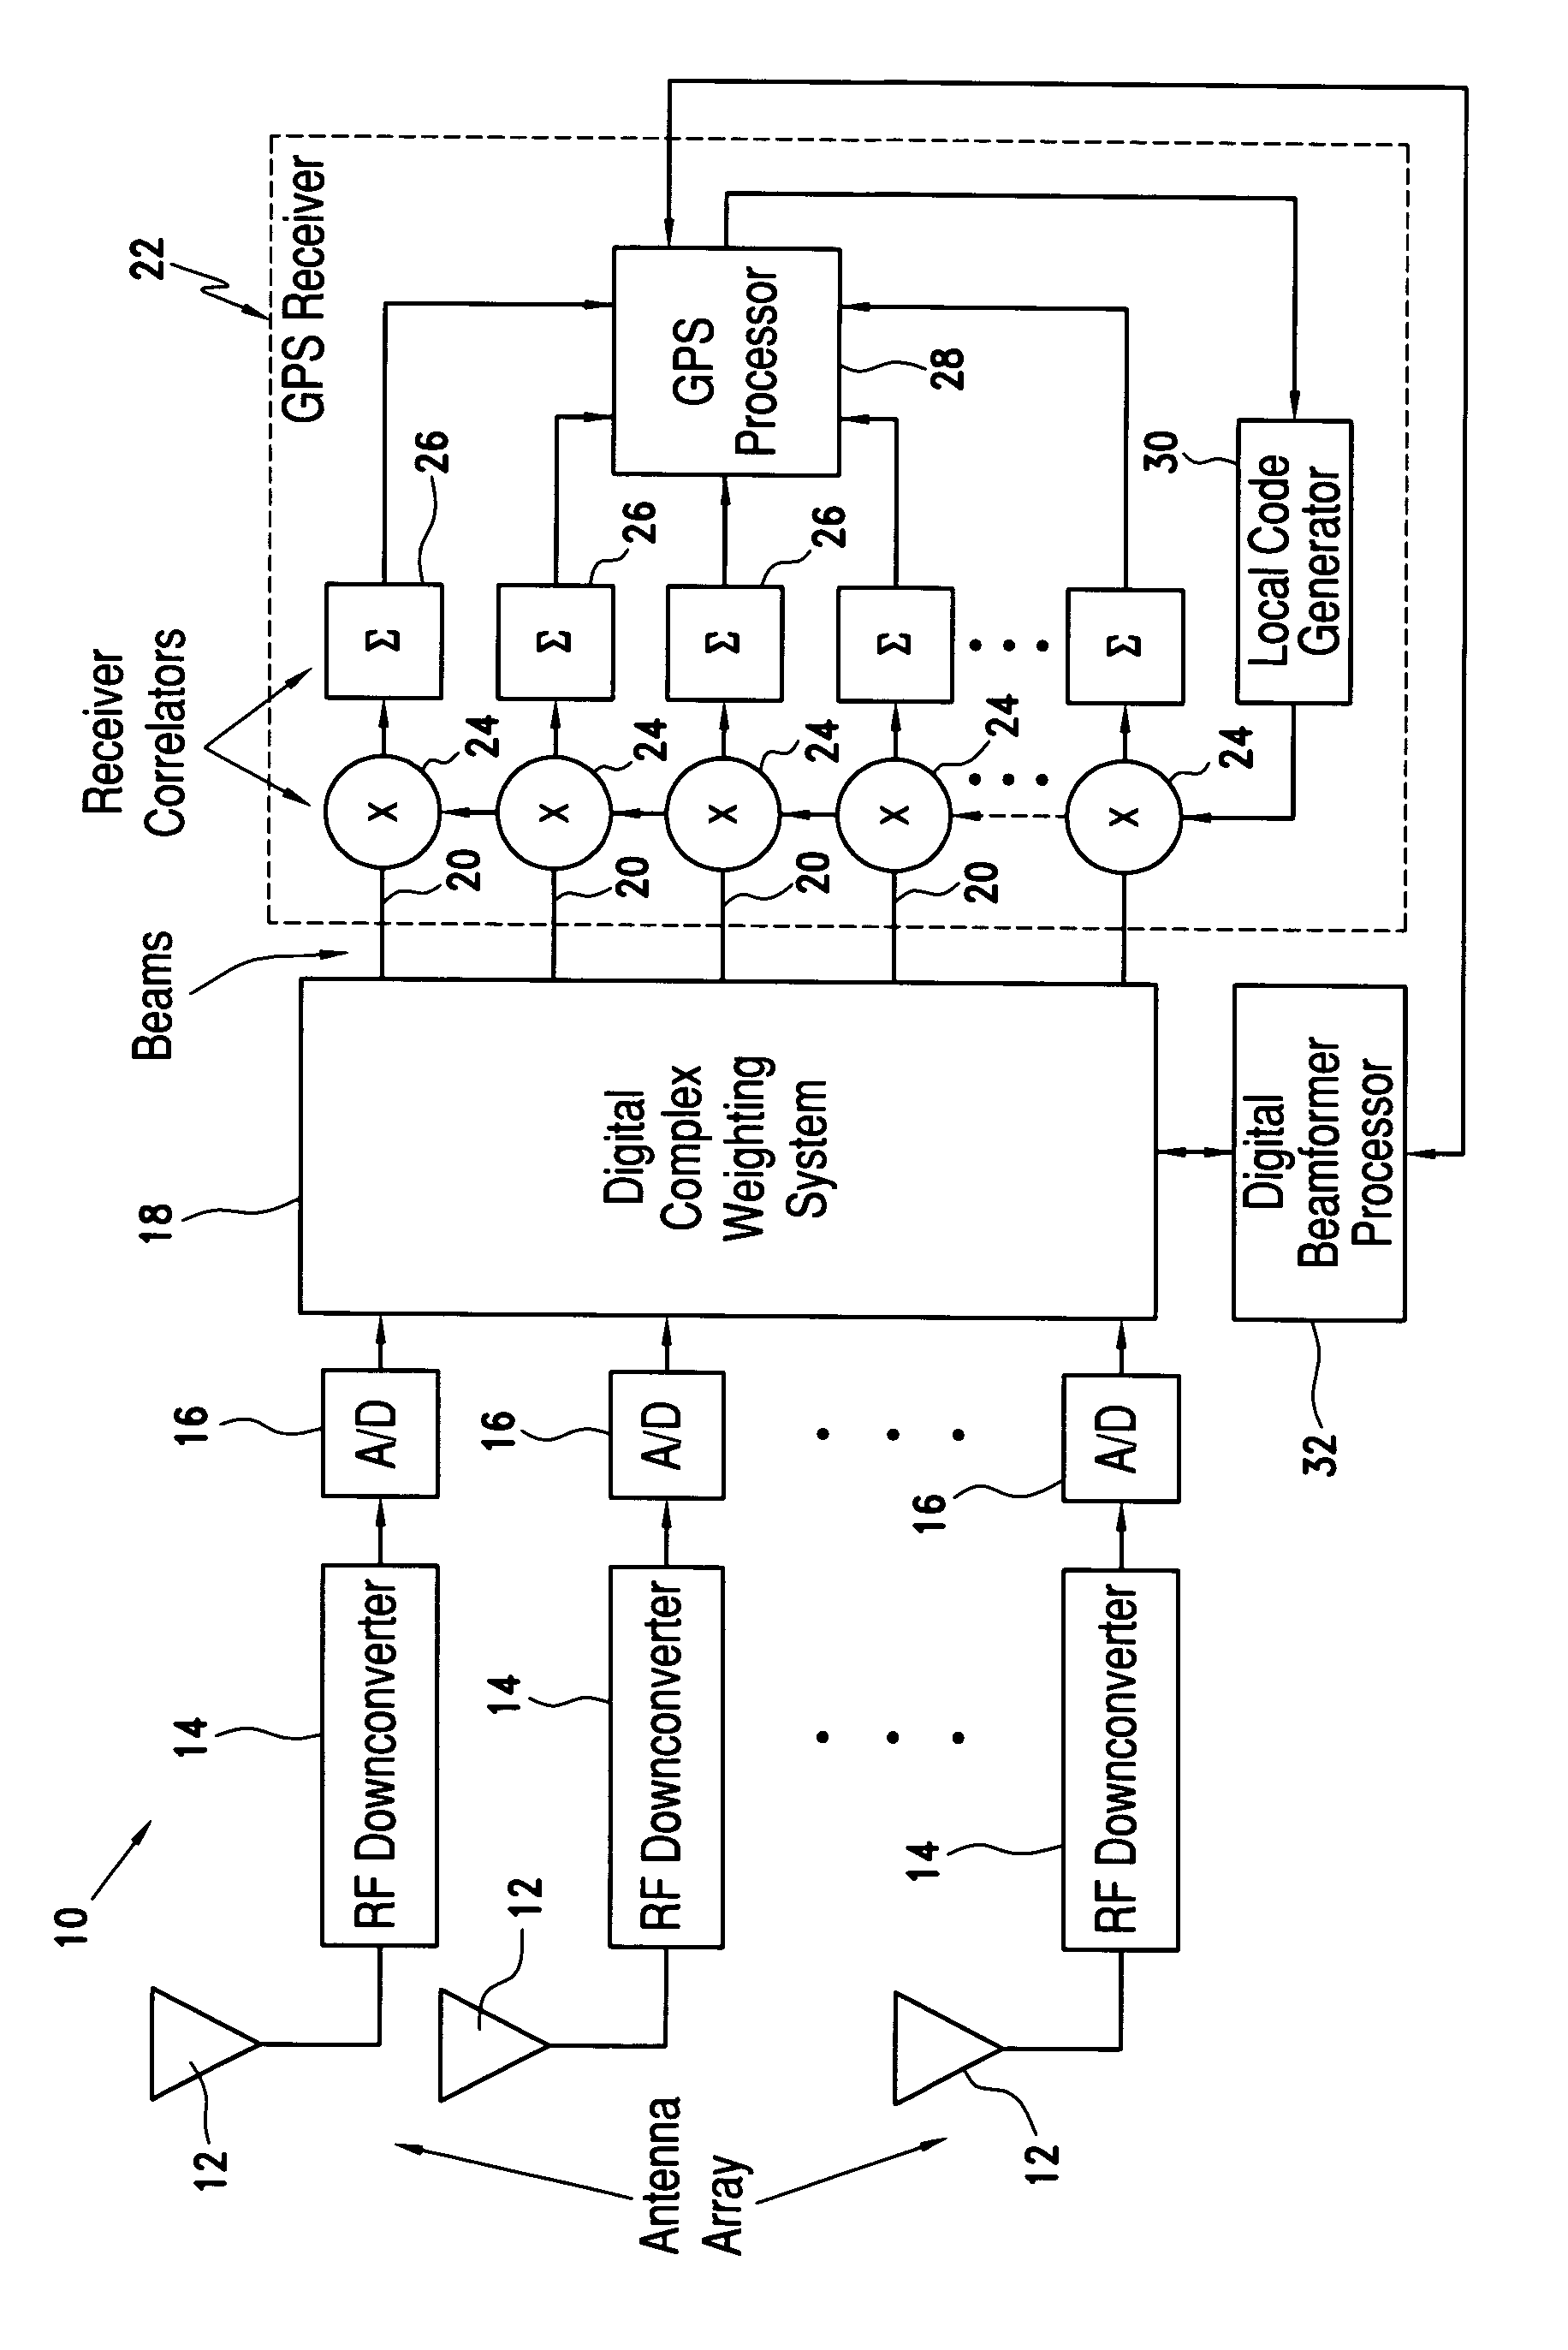 GPS spoofer and repeater mitigation system using digital spatial nulling